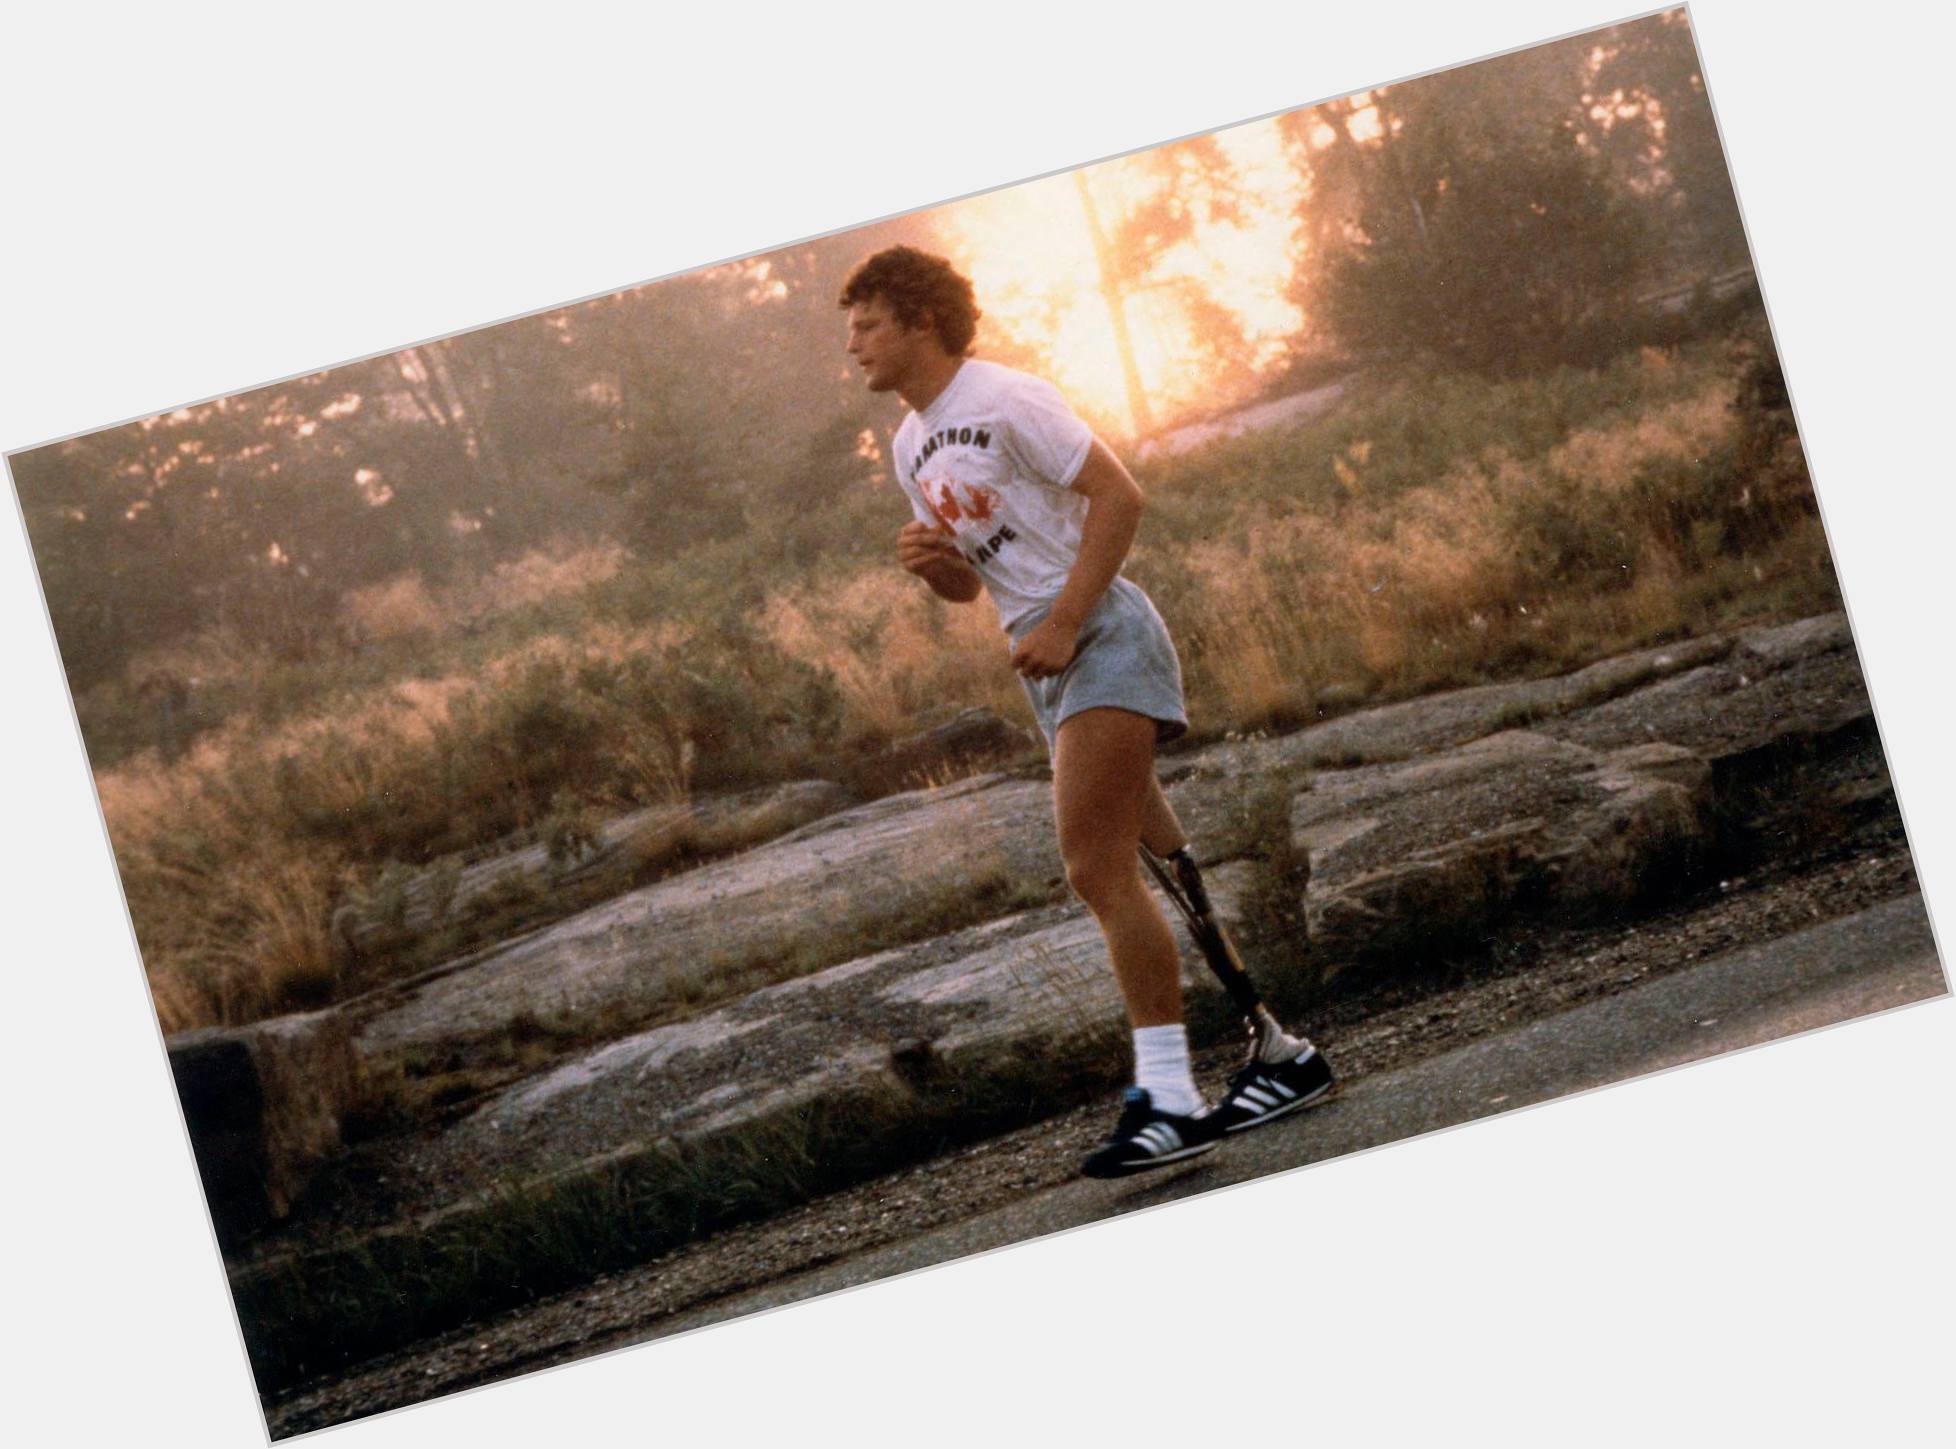 <a href="/hot-men/terry-fox/is-he-still-alive-hero-leader-christian-canadian">Terry Fox</a> Athletic body,  dark brown hair & hairstyles